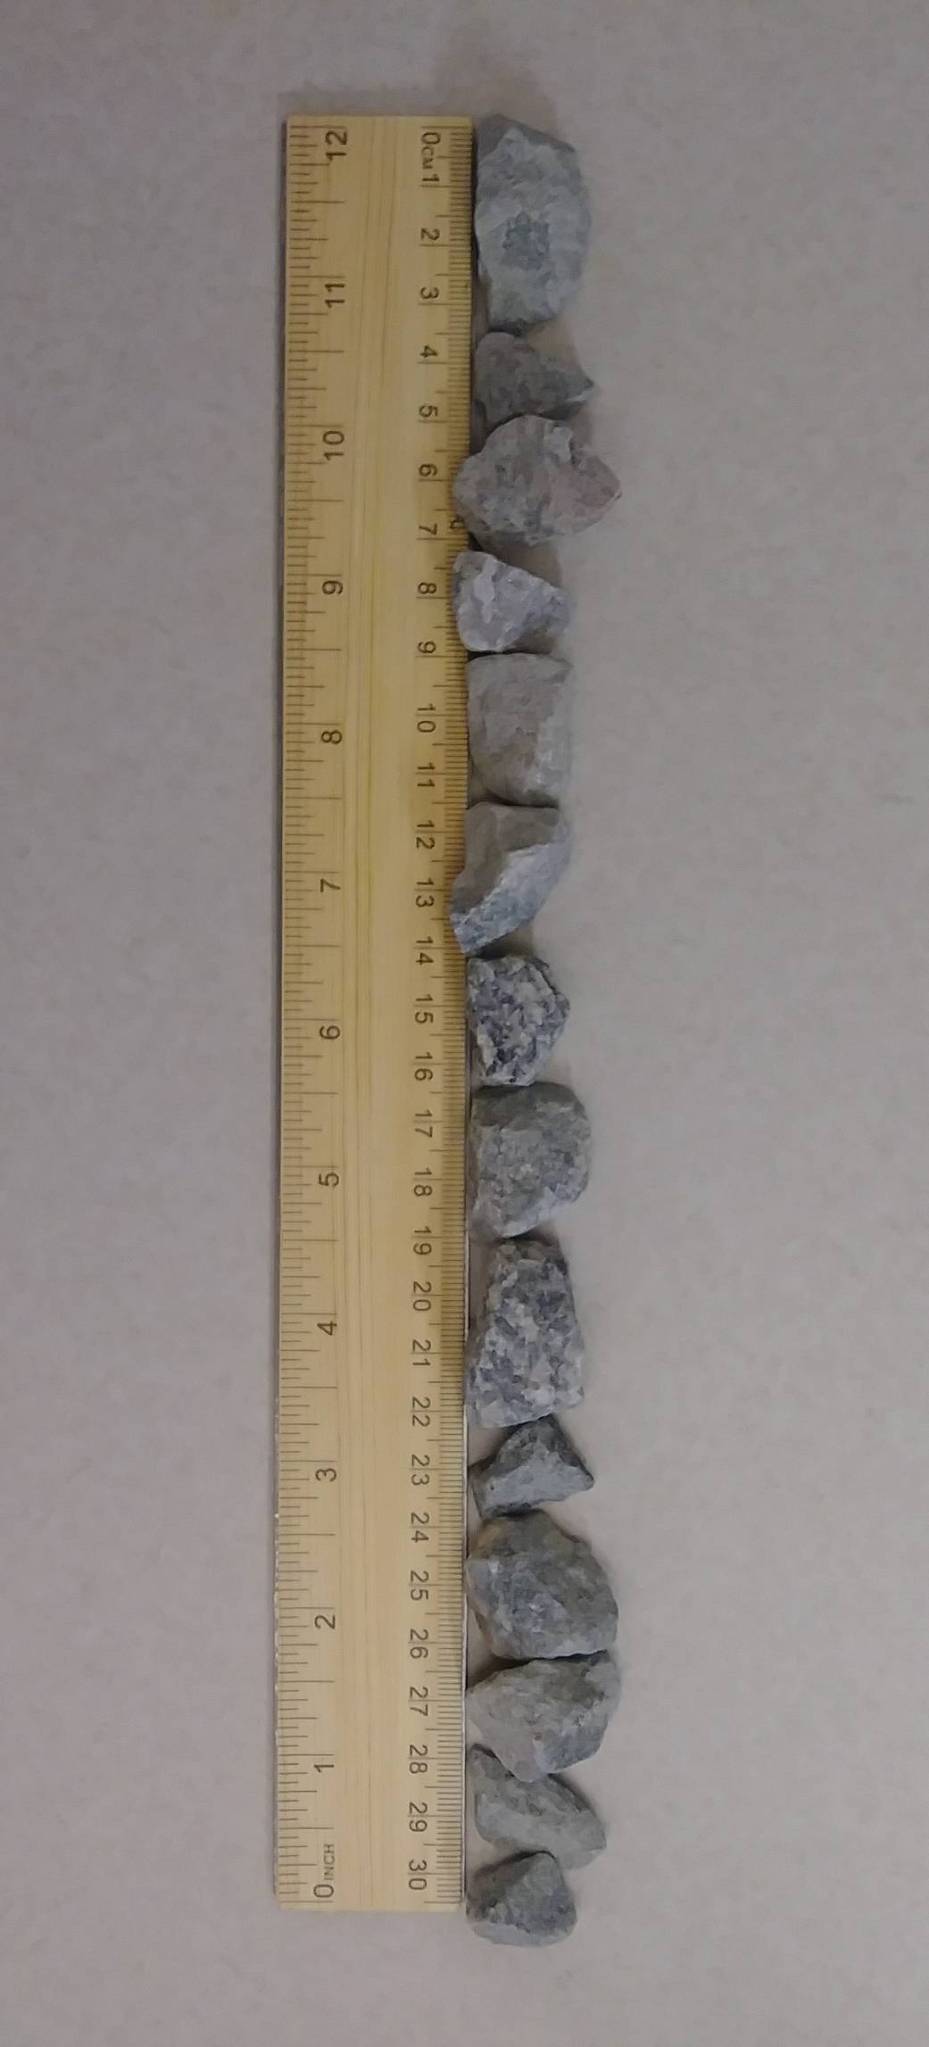 Measurement of gravel with a ruler